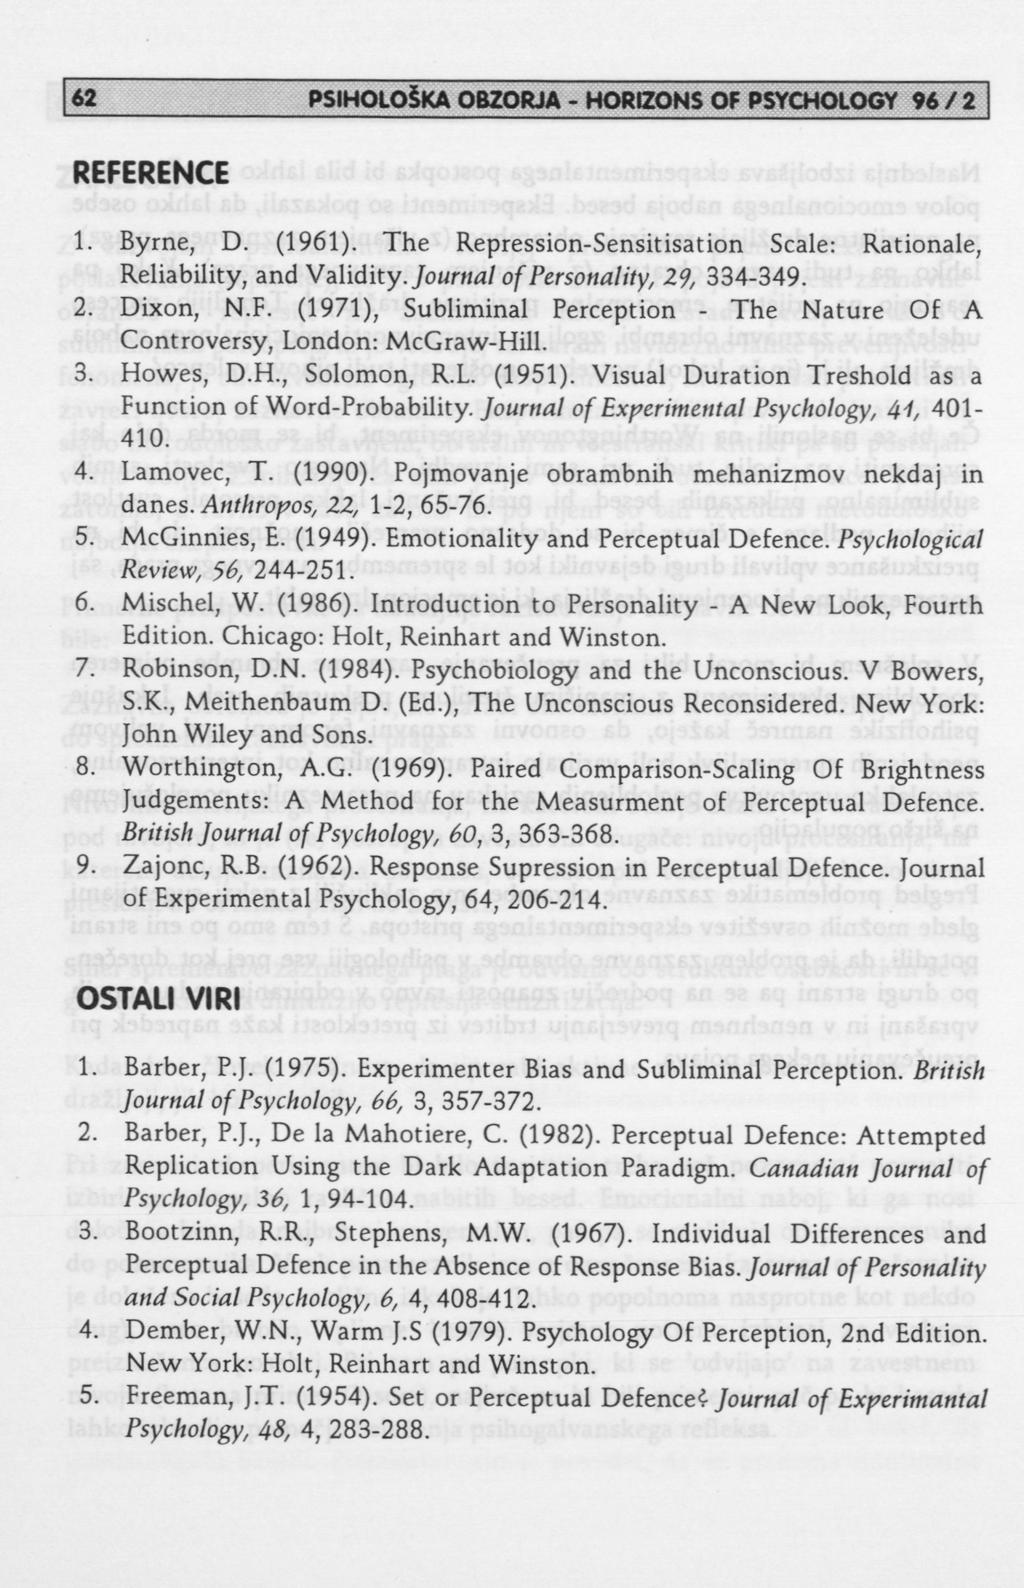 REFERENCE 1. Byrne, D. (1961). The Repression-Sensitisation Scale: Rationale, Reliability, and VdiMity. Journal of Personality, 29, 334-349. 2. Dixon, N.F. (1971), Subliminal Perception - The Nature Of A Controversy, London: McGraw-Hill.